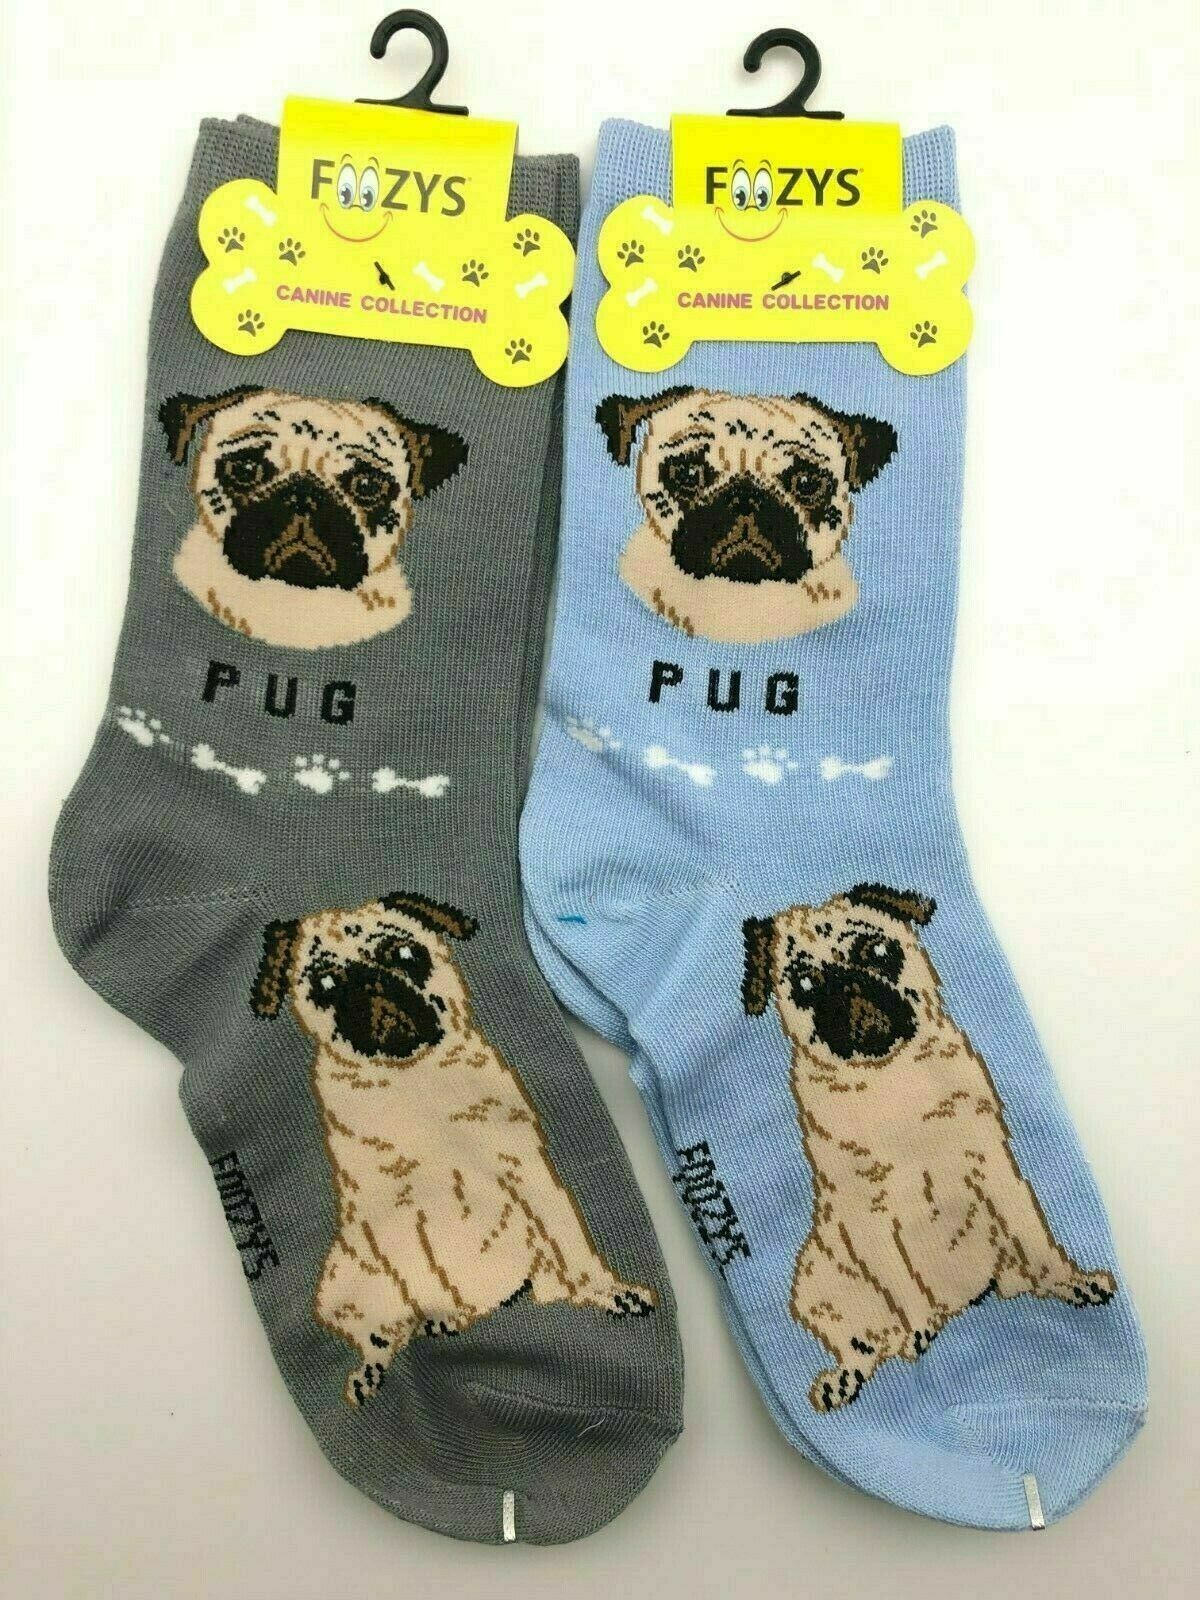 Pug Lapdog Wrinkled Toy Dog Breed Women's Foozys Puppy Cute Dogs 2 Pairs Socks